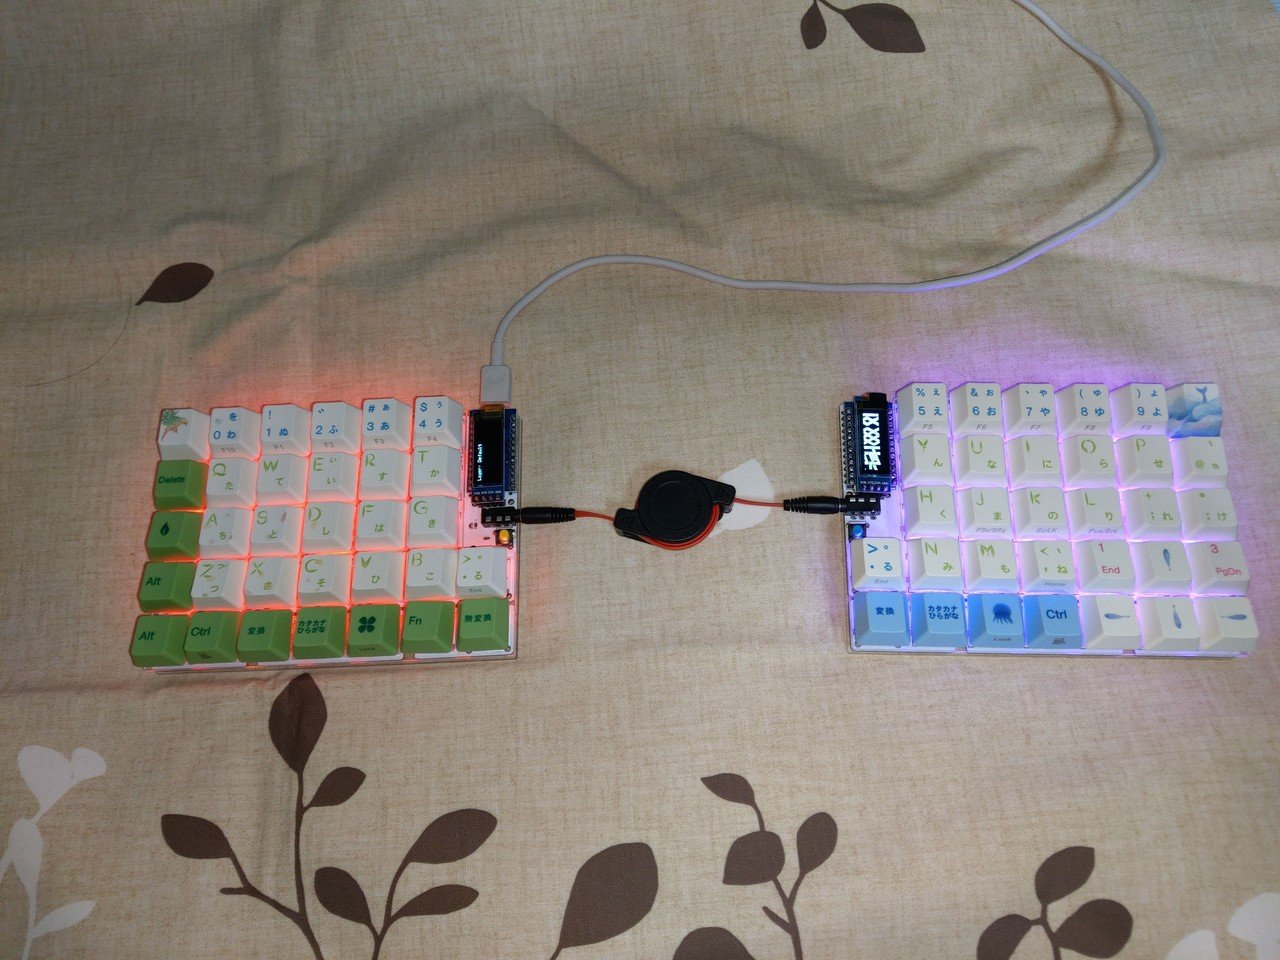 Dimple40 R1 自作キーボード